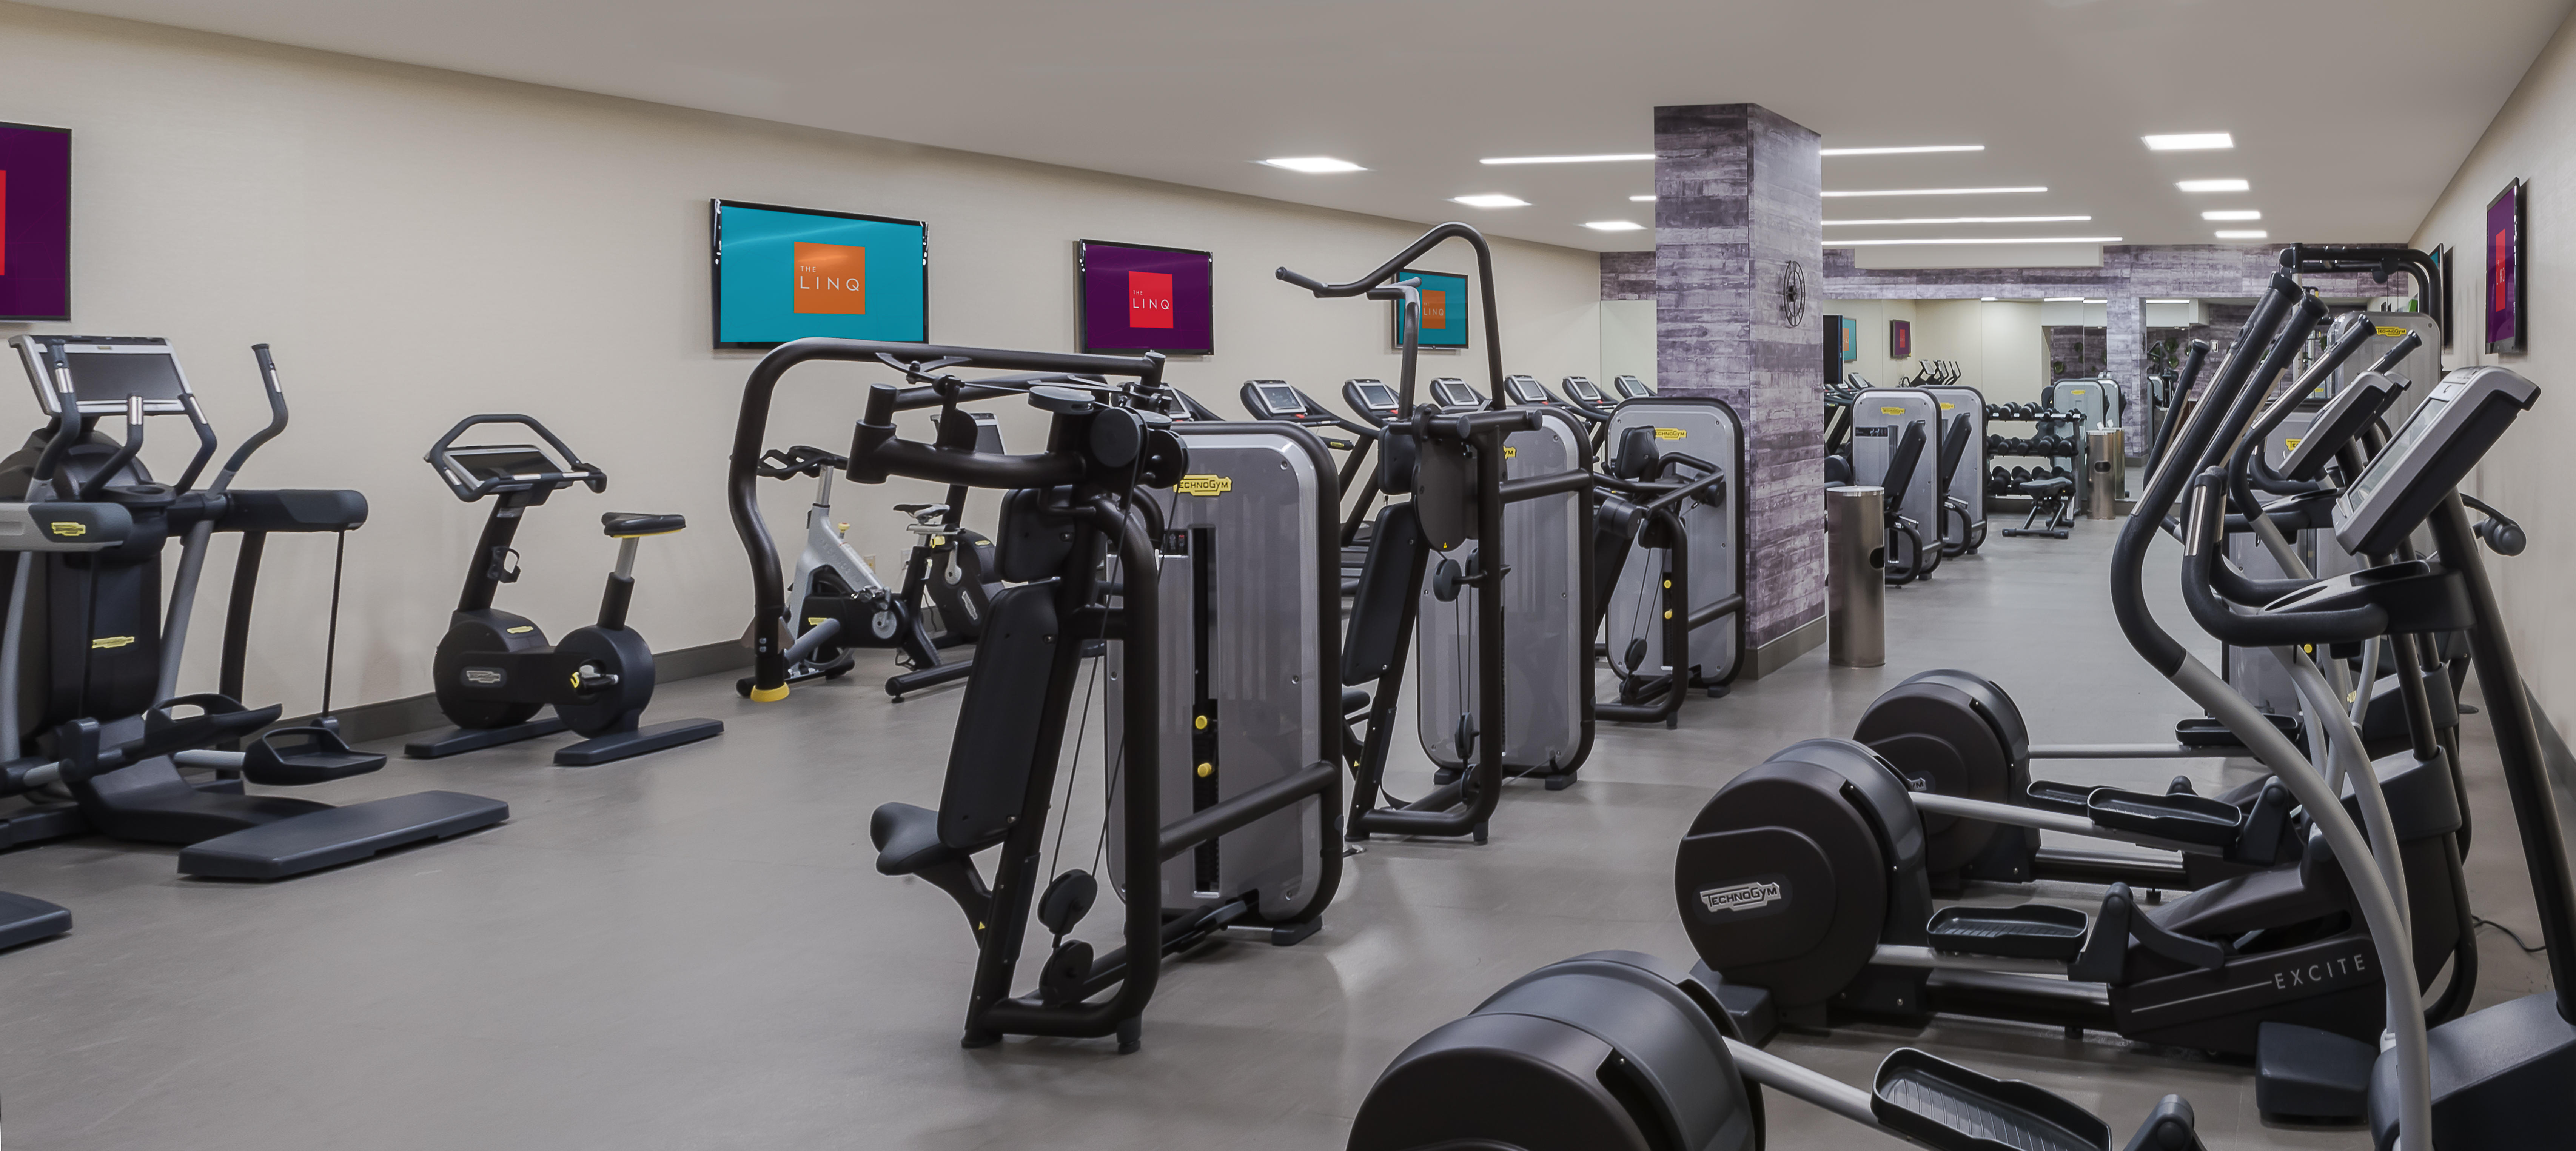 Enjoy the Linq Fitness center on the center strip in Las Vegas.